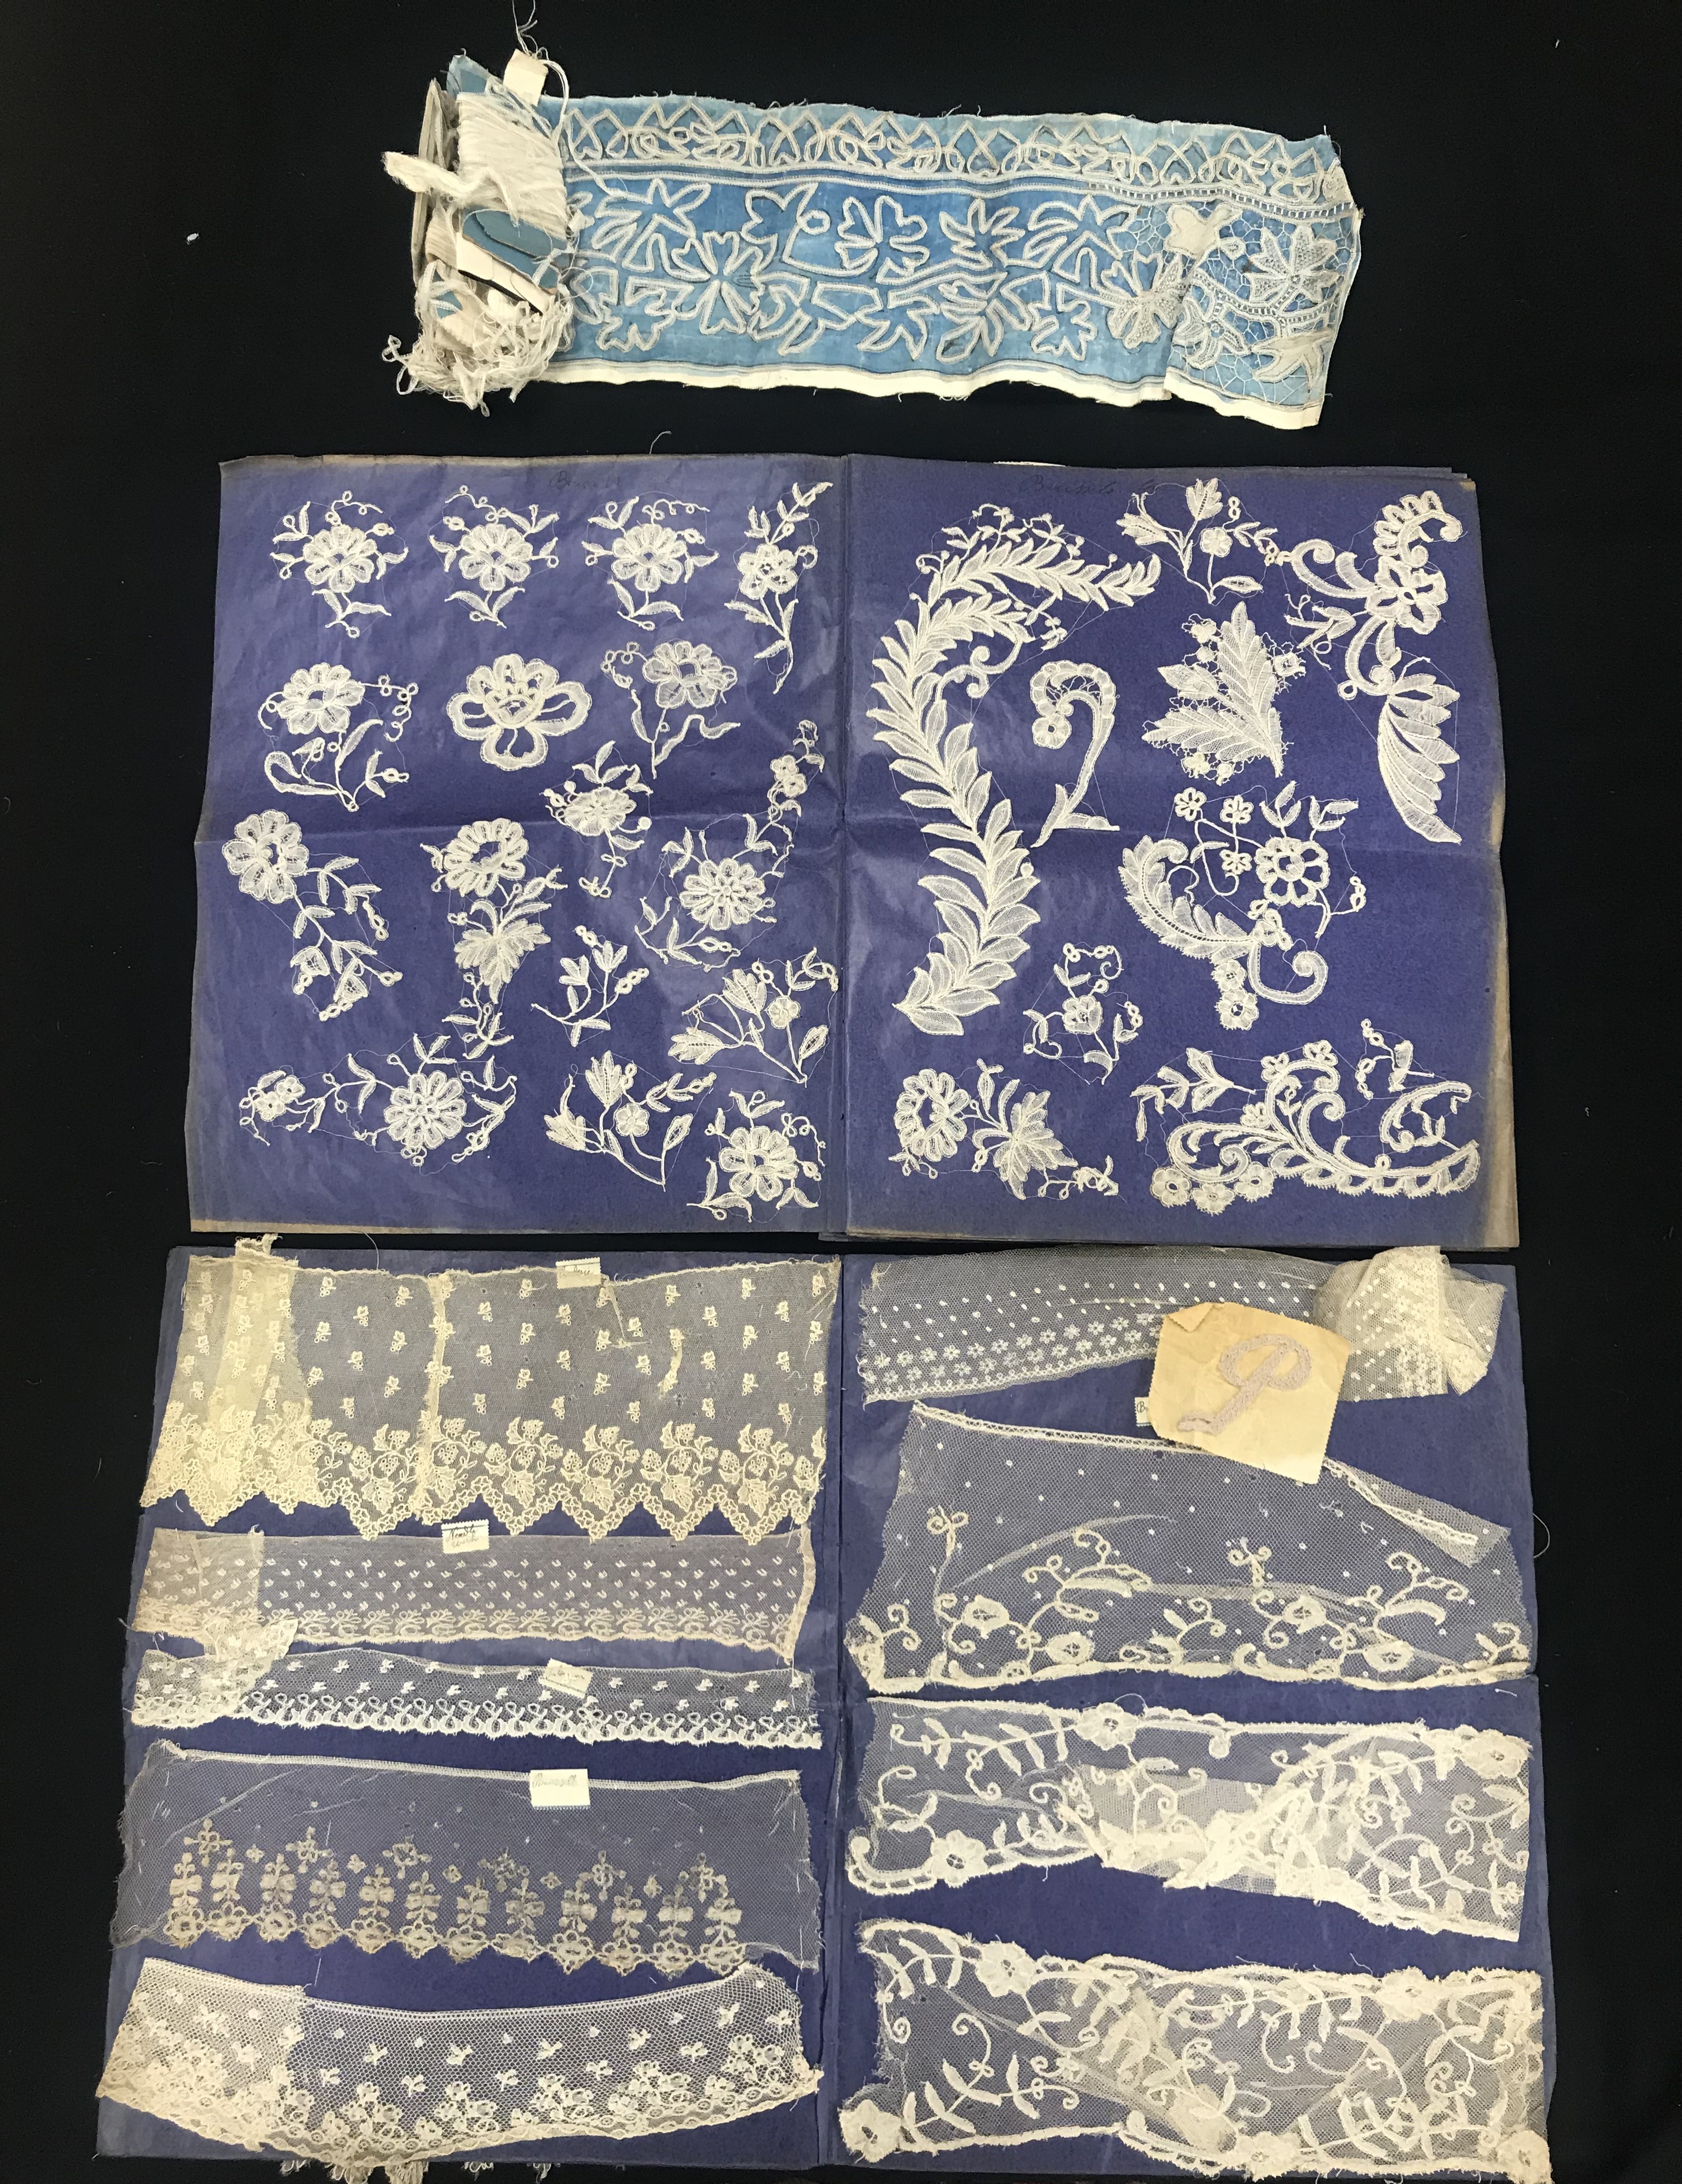 A collection of Brussels and other lace samples, mounted on waxed paper,